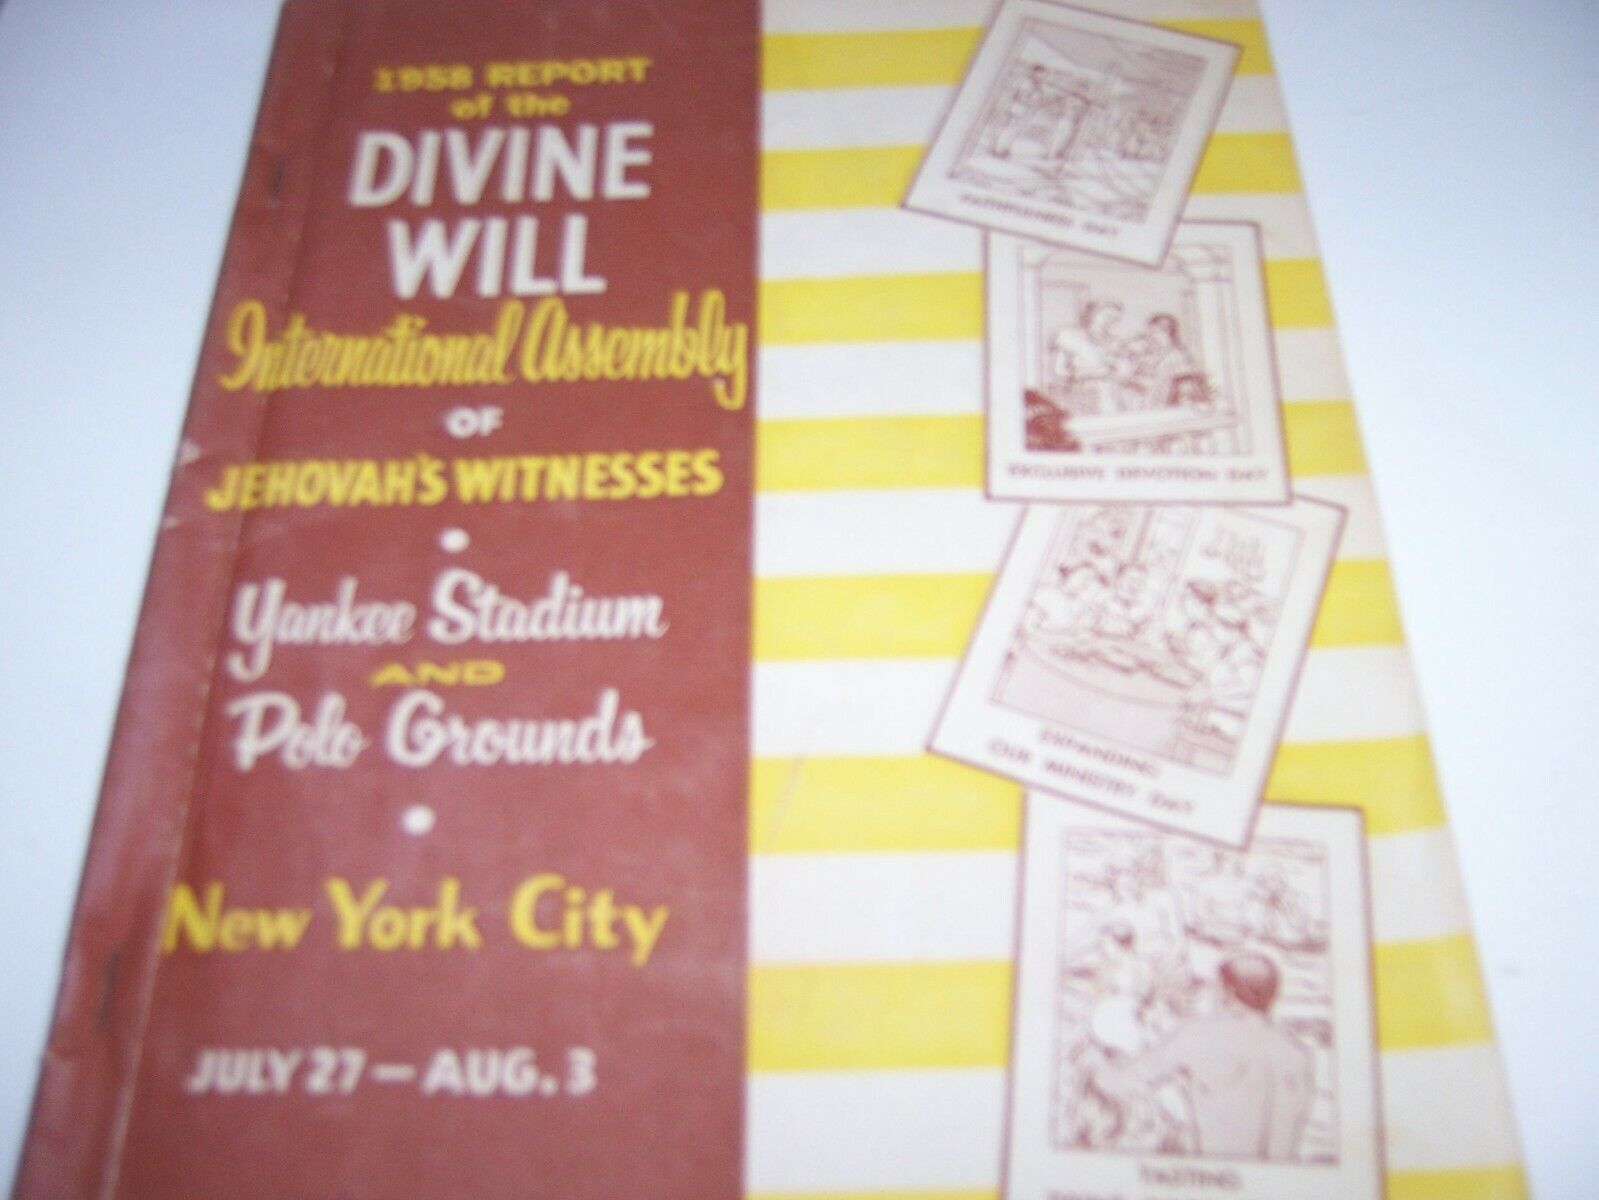 1958 Yankee Stadium Divine Will International Assembly Watchtower  112 pages